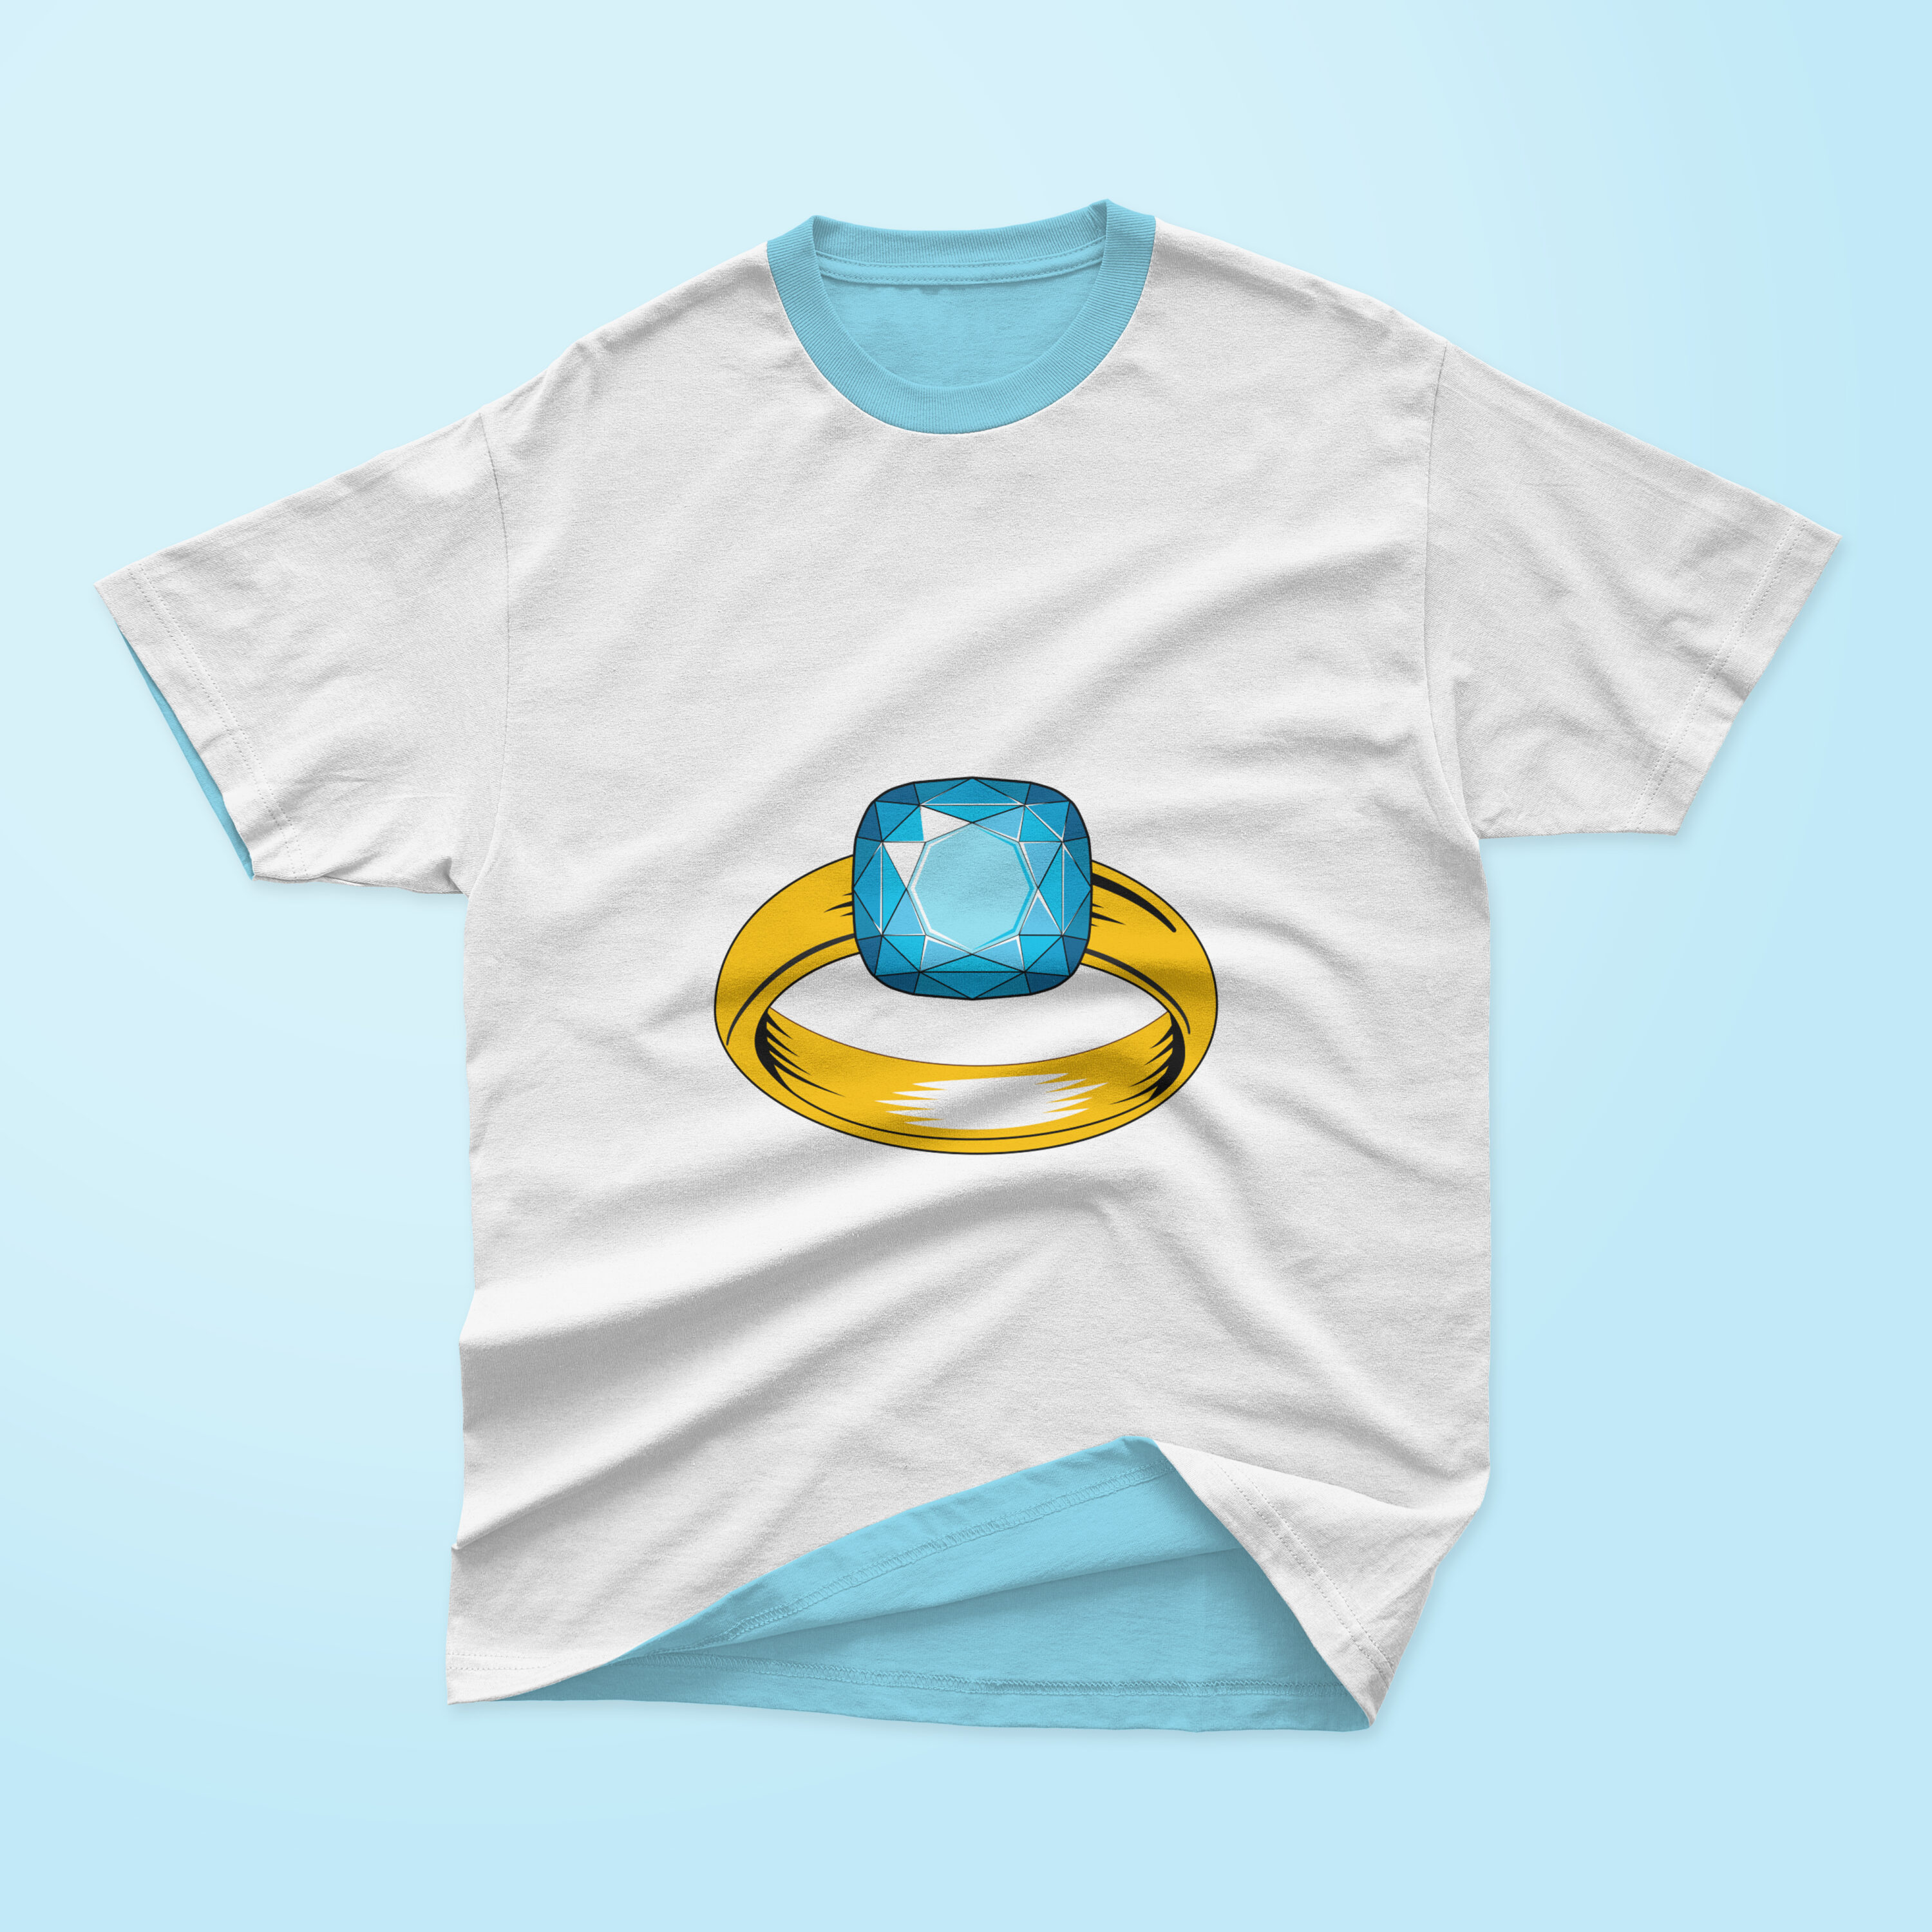 Image of t-shirt with colorful print of diamond engagement ring.